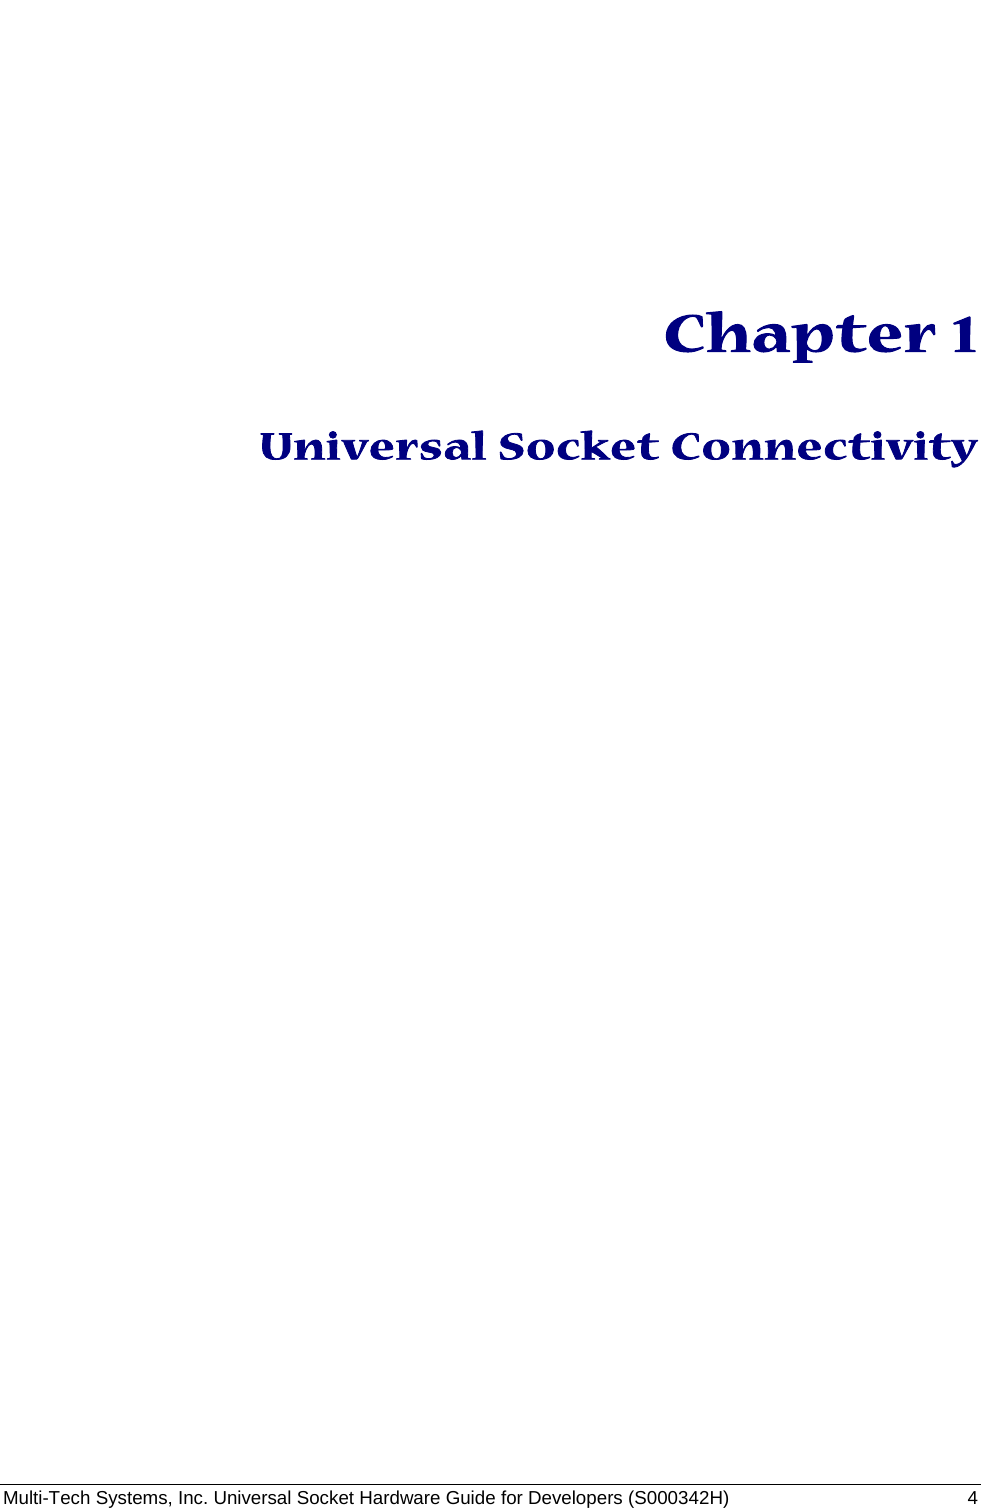  Multi-Tech Systems, Inc. Universal Socket Hardware Guide for Developers (S000342H)  4               Chapter 1  Universal Socket Connectivity  